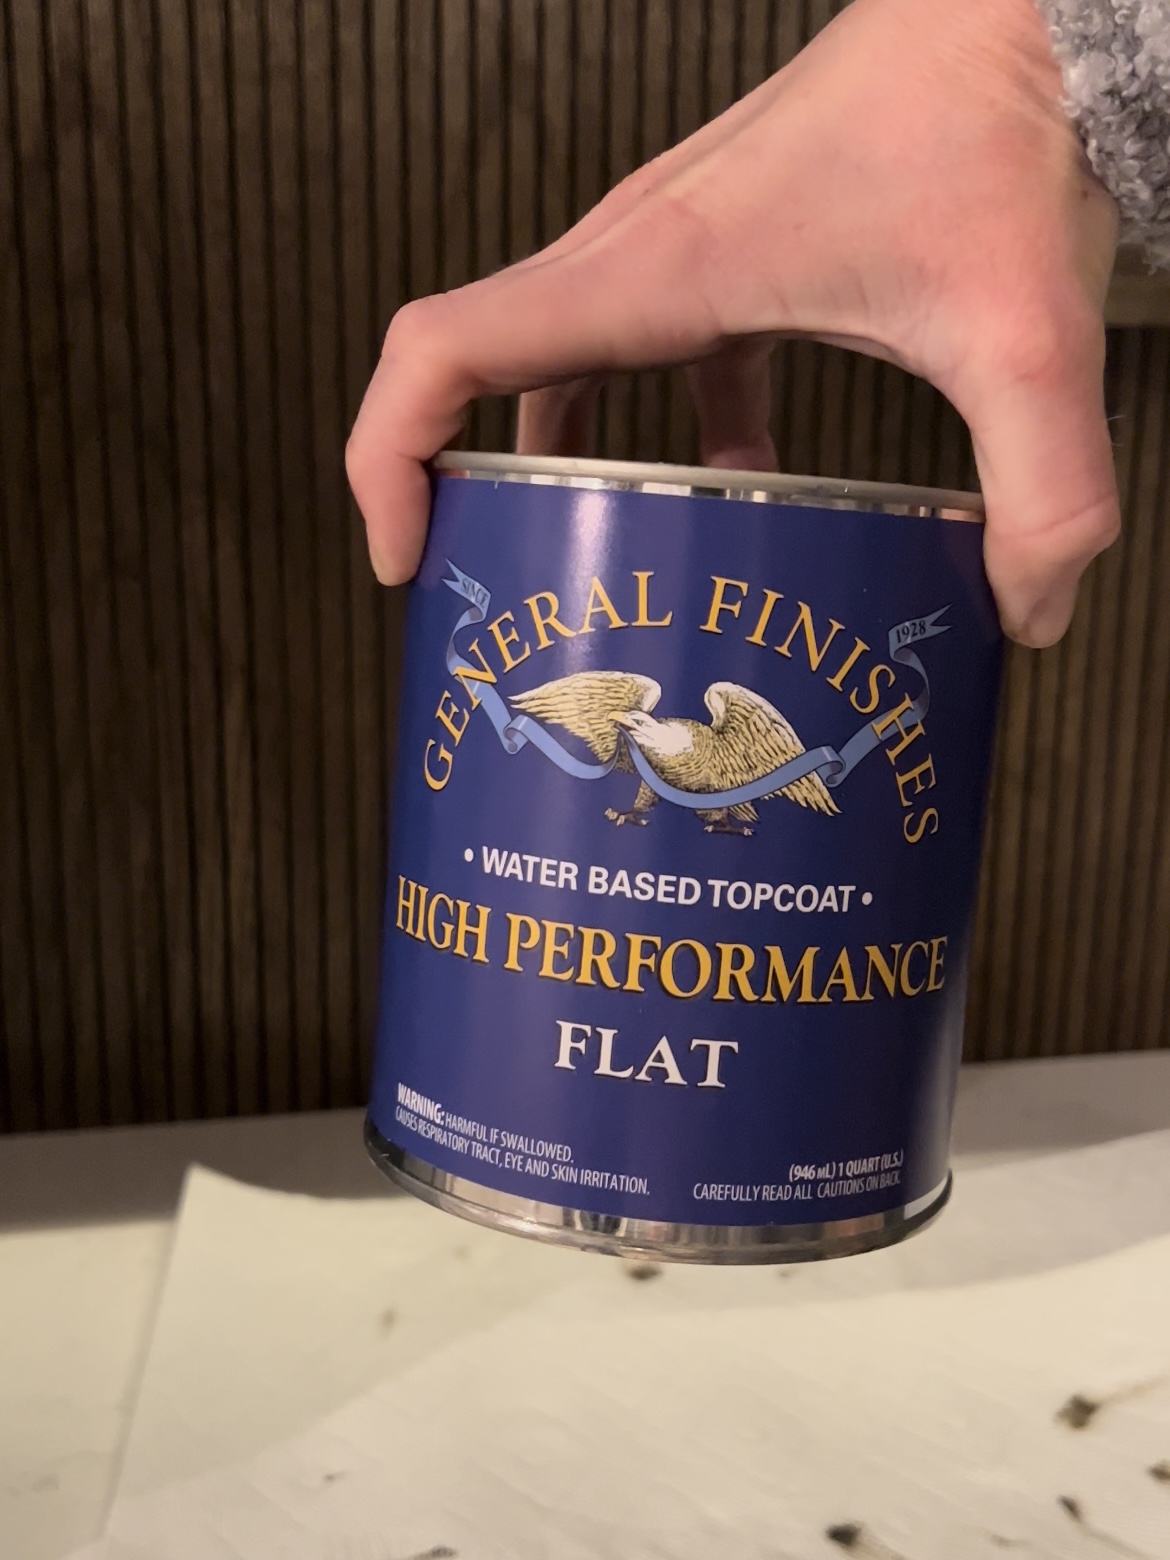 Hand holding can of General Finishes topcoat.